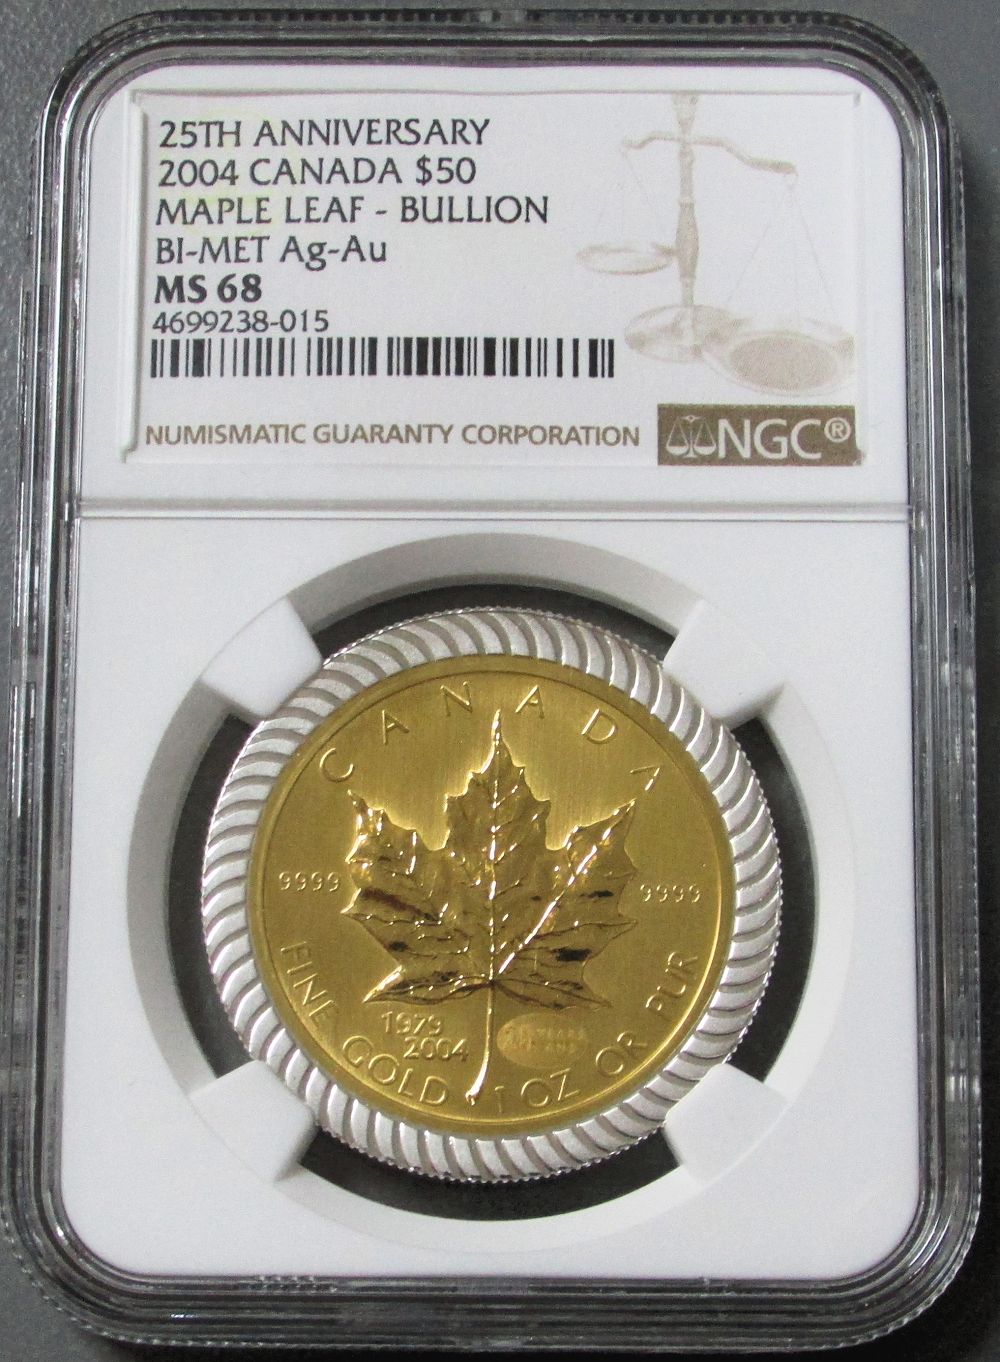 2004 BI METAL GOLD / SILVER CANADA $50 MAPLE LEAF 25th ANNIVERSARY 1 OZ NGC MINT STATE 68 ONLY 801 MINTED